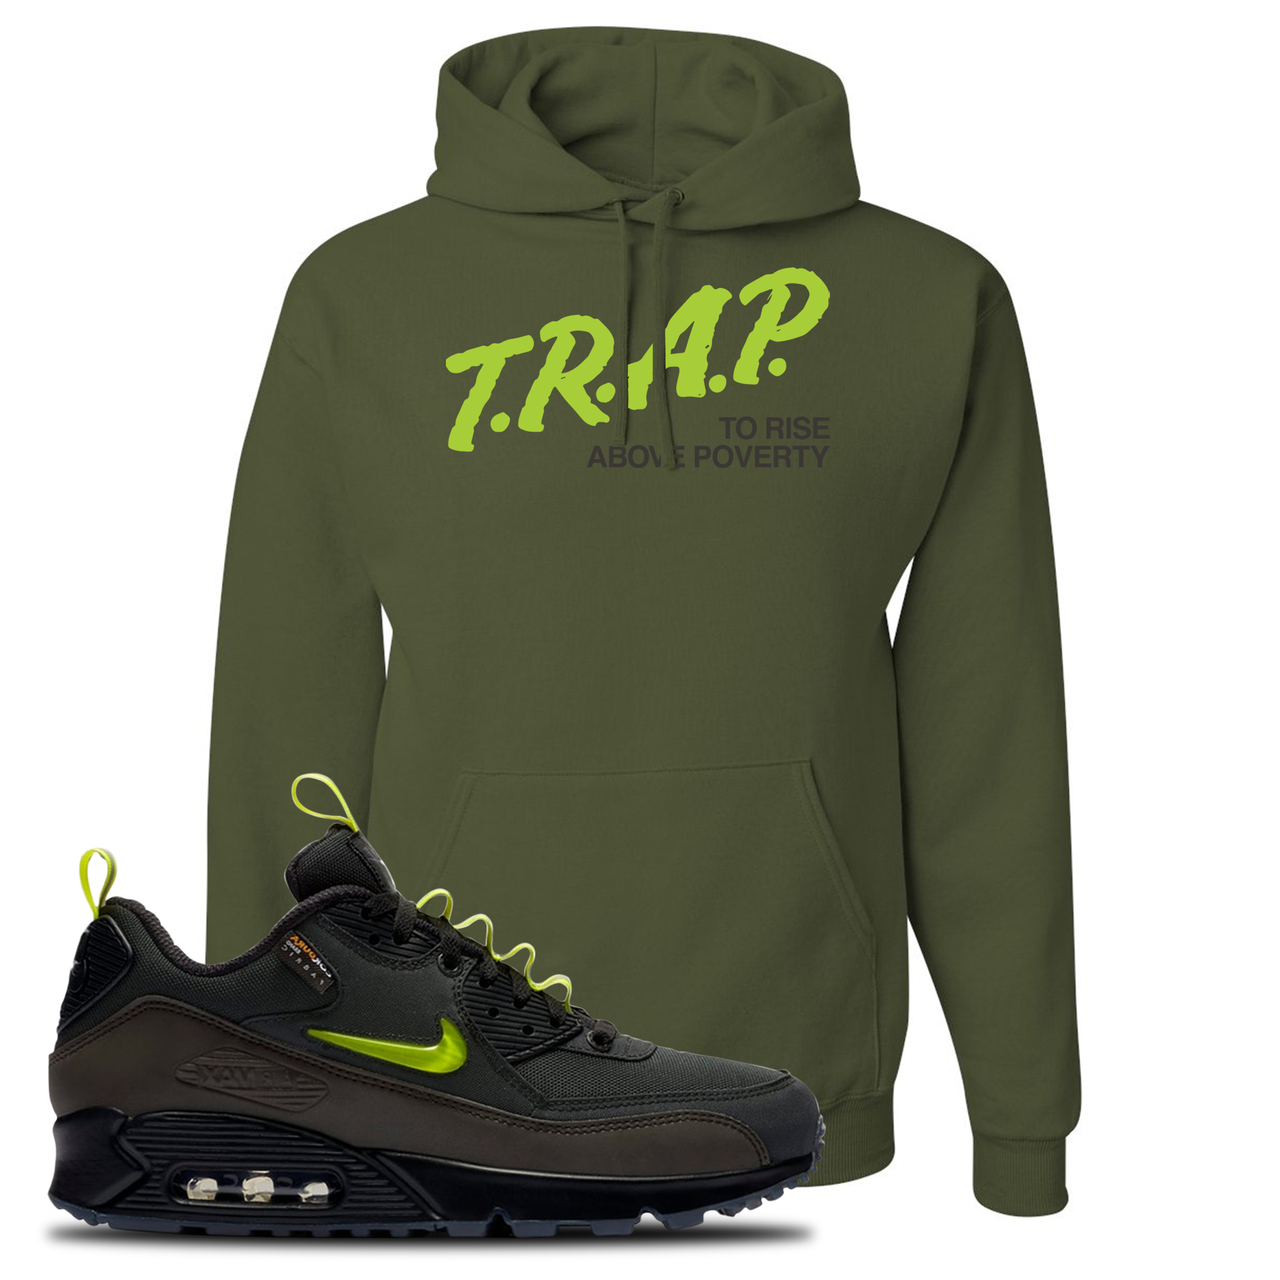 The Basement X Air Max 90 Manchester Trap to Rise Above Poverty Military Green Sneaker Hook Up Pullover Hoodie